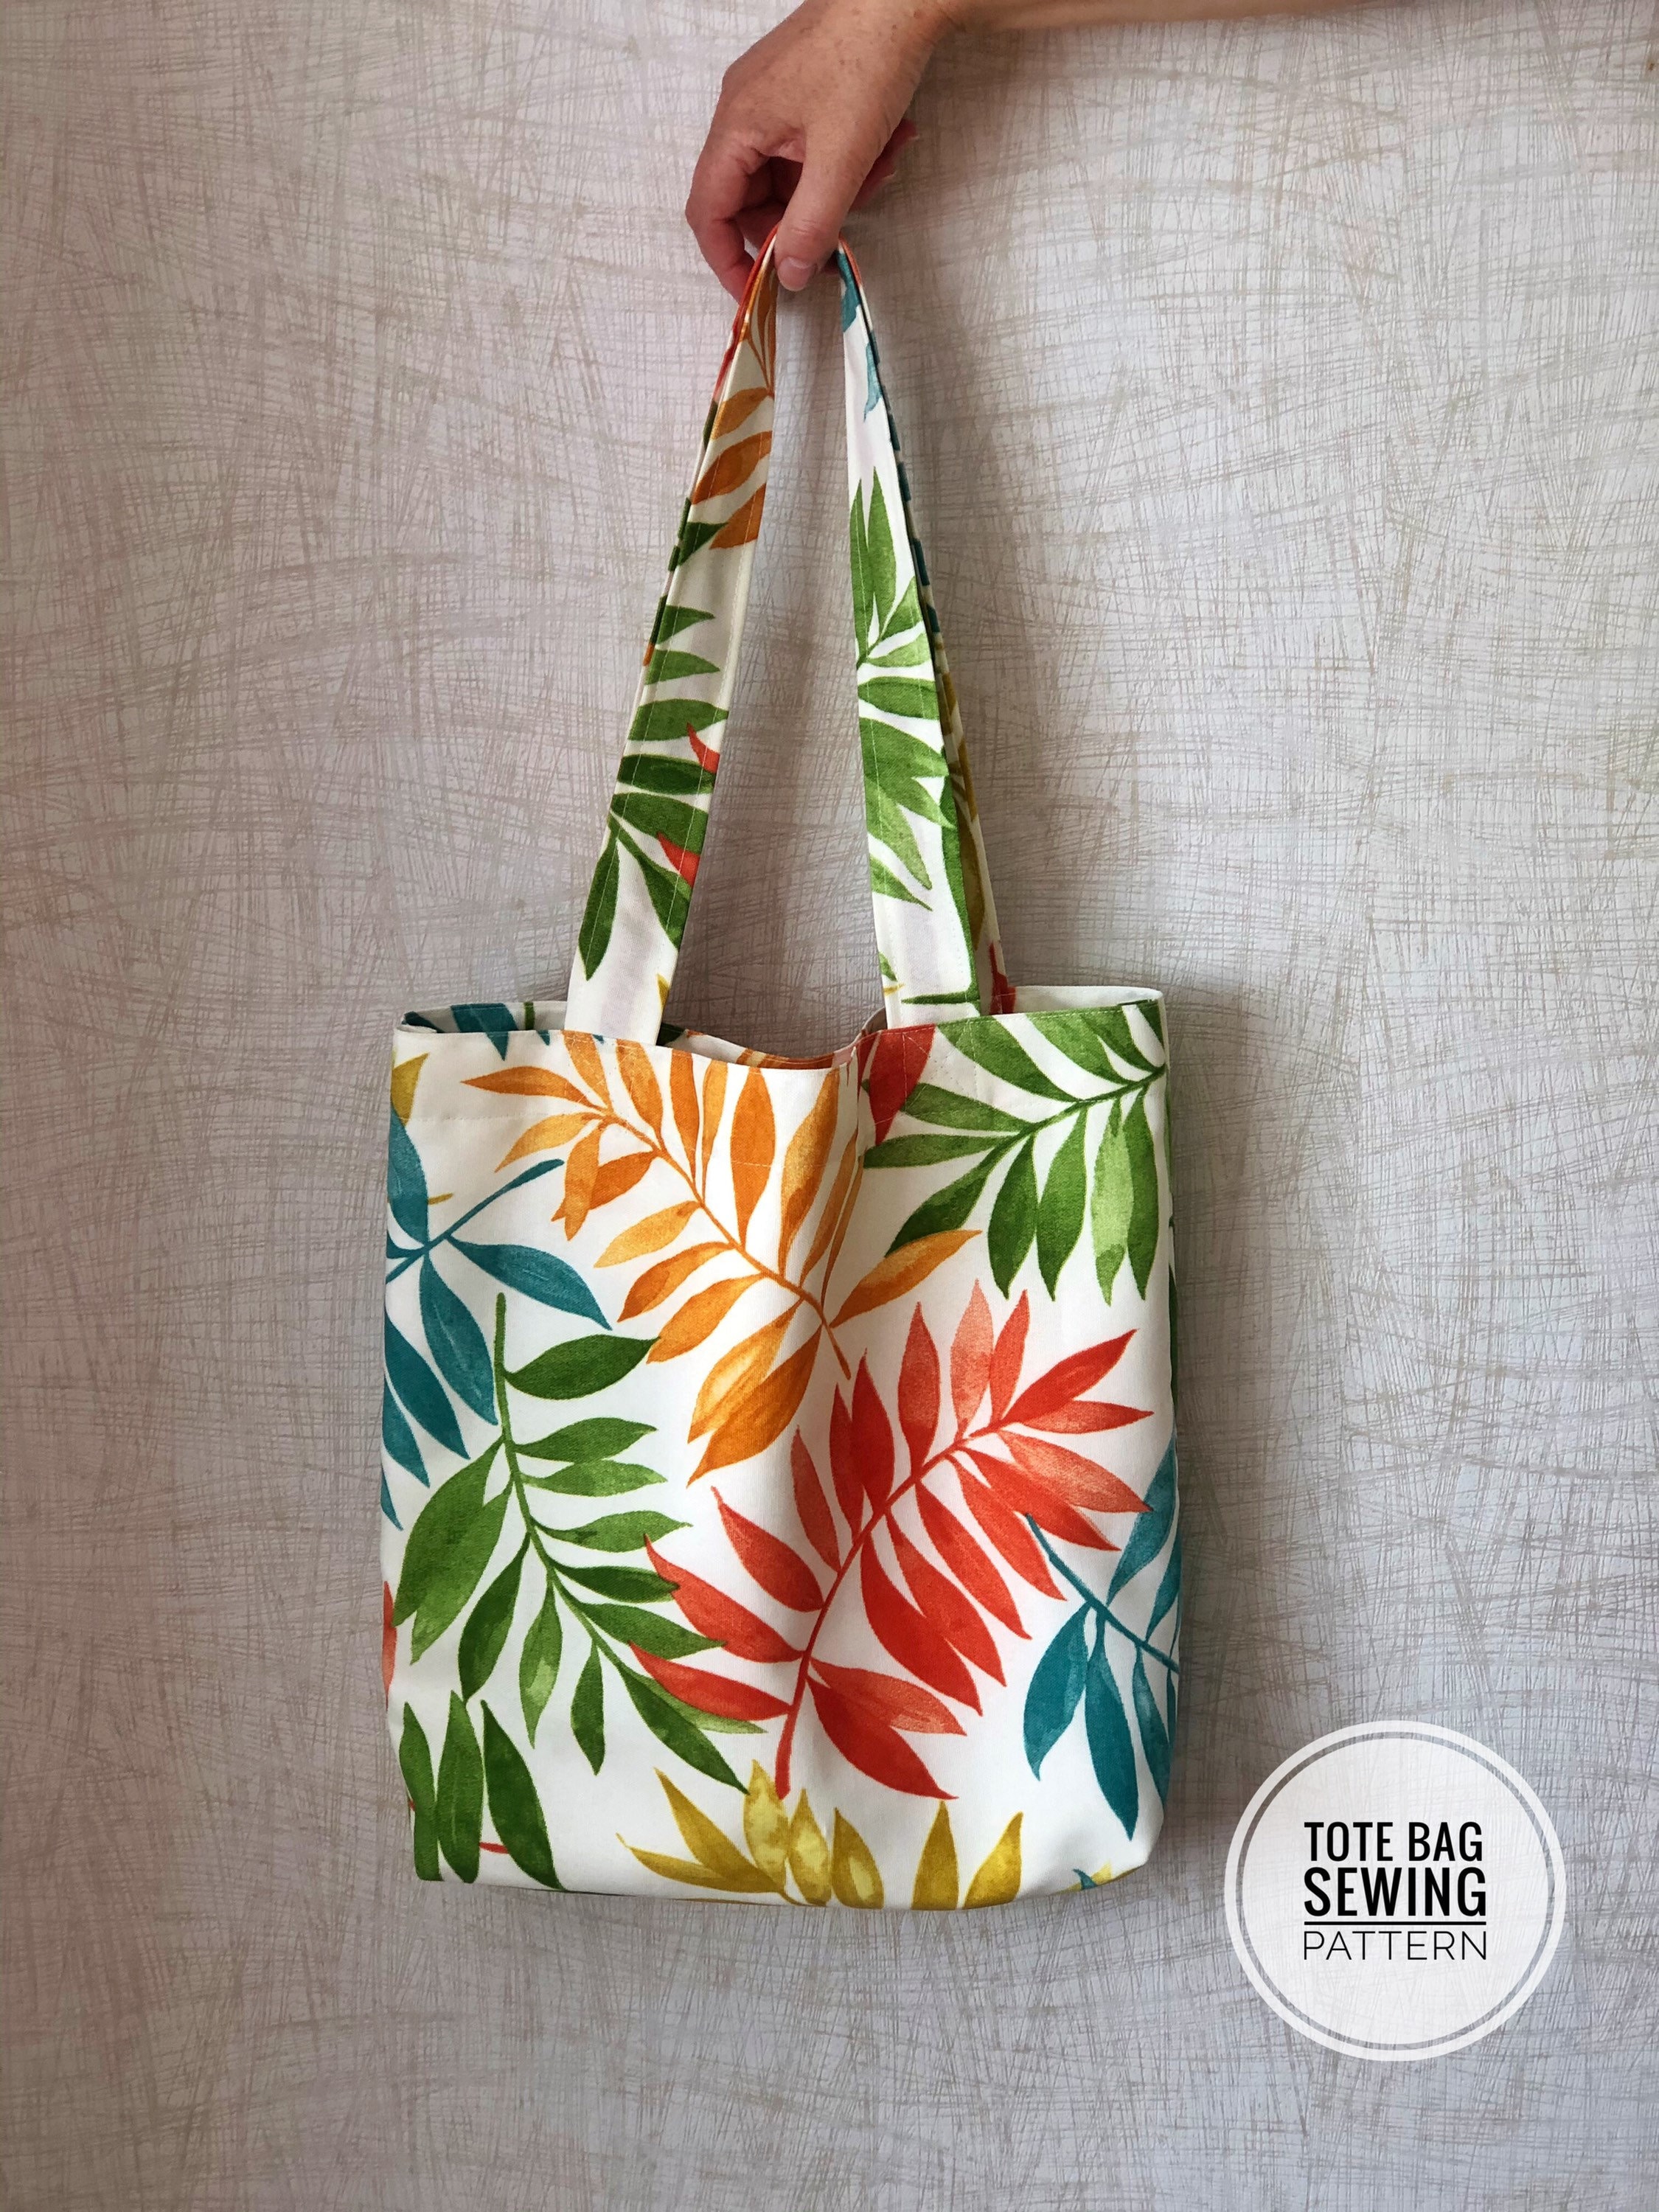 Tote bag pattern pdf sewing patterns for women grocery tote | Etsy